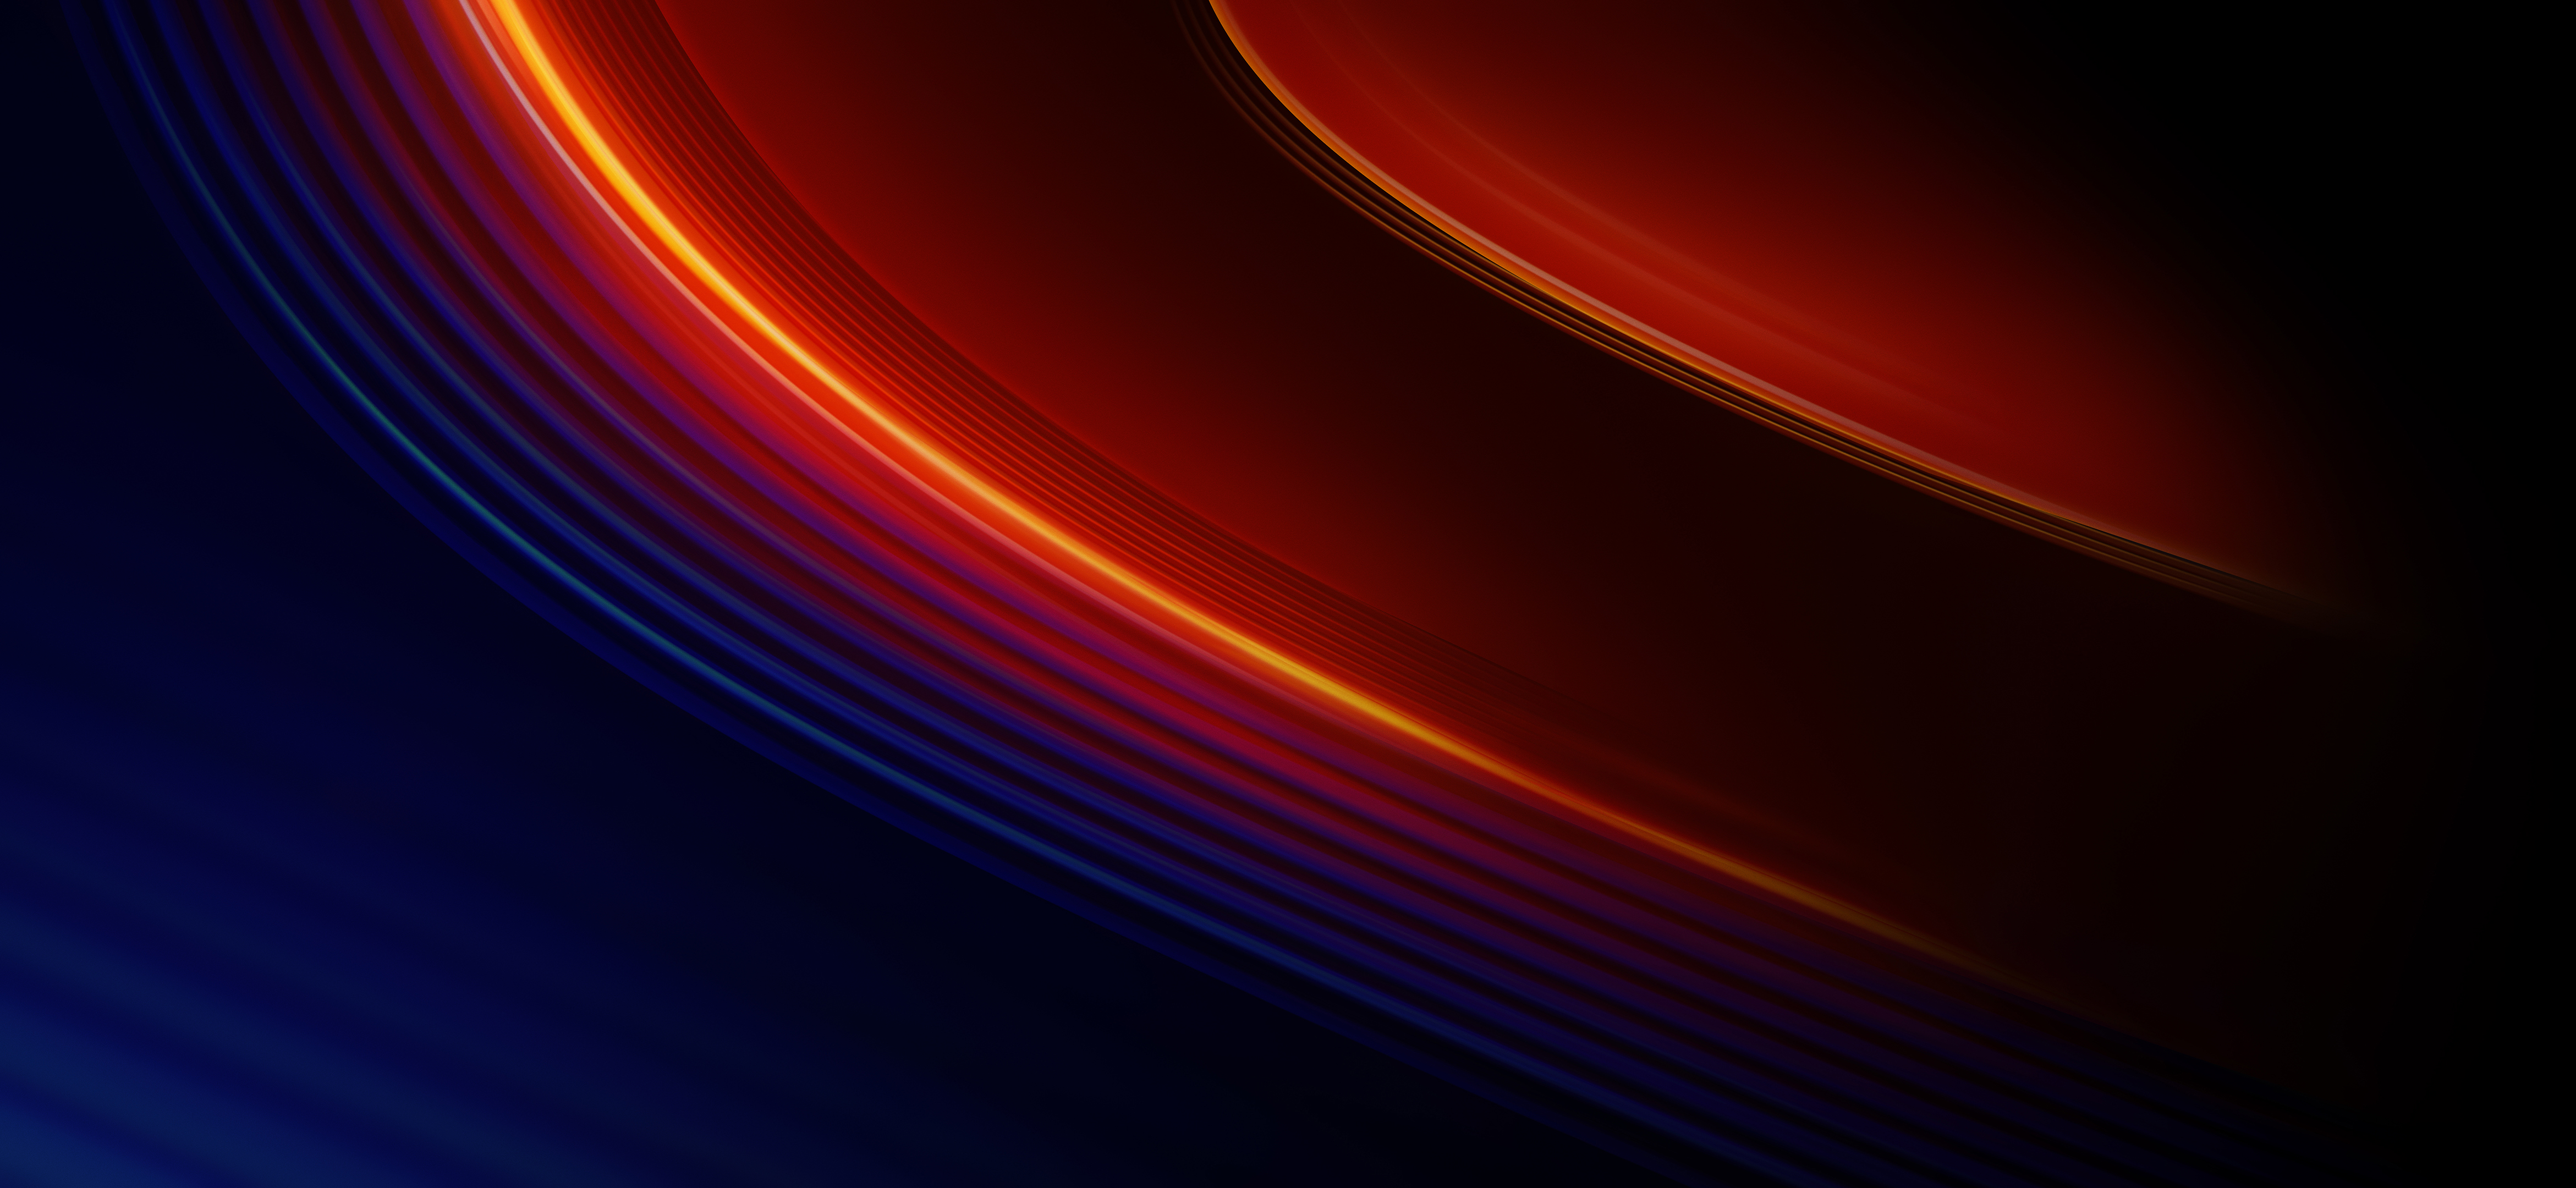 OnePlus 8 Pro Wallpaper 4K, Stock, Lines, 2020, Abstract, #510